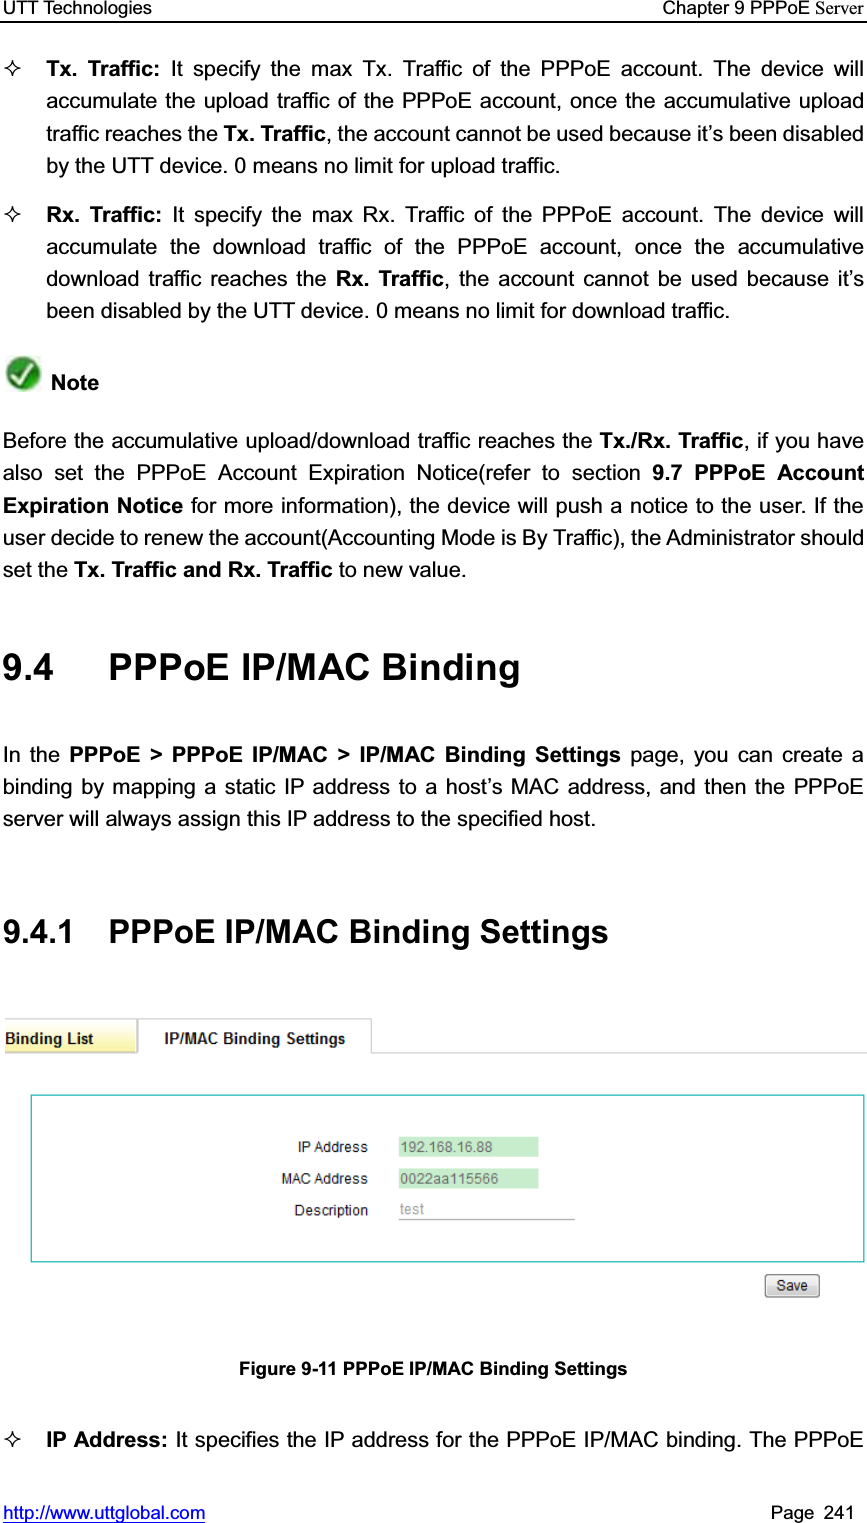 UTT Technologies    Chapter 9 PPPoE Serverhttp://www.uttglobal.com Page 241 Tx. Traffic: It specify the max Tx. Traffic of the PPPoE account. The device will accumulate the upload traffic of the PPPoE account, once the accumulative upload traffic reaches the Tx. Traffic, the account cannot be used because it¶s been disabled by the UTT device. 0 means no limit for upload traffic. Rx. Traffic: It specify the max Rx. Traffic of the PPPoE account. The device will accumulate the download traffic of the PPPoE account, once the accumulative download traffic reaches the Rx. Traffic, the account cannot be used because it¶sbeen disabled by the UTT device. 0 means no limit for download traffic. NoteBefore the accumulative upload/download traffic reaches the Tx./Rx. Traffic, if you have also set the PPPoE Account Expiration Notice(refer to section 9.7 PPPoE Account Expiration Notice for more information), the device will push a notice to the user. If the user decide to renew the account(Accounting Mode is By Traffic), the Administrator should set the Tx. Traffic and Rx. Traffic to new value. 9.4  PPPoE IP/MAC Binding   In the PPPoE &gt; PPPoE IP/MAC &gt; IP/MAC Binding Settings page, you can create a binding by mapping a static IP address to a host¶s MAC address, and then the PPPoE server will always assign this IP address to the specified host.   9.4.1 PPPoE IP/MAC Binding Settings Figure 9-11 PPPoE IP/MAC Binding Settings IP Address: It specifies the IP address for the PPPoE IP/MAC binding. The PPPoE 